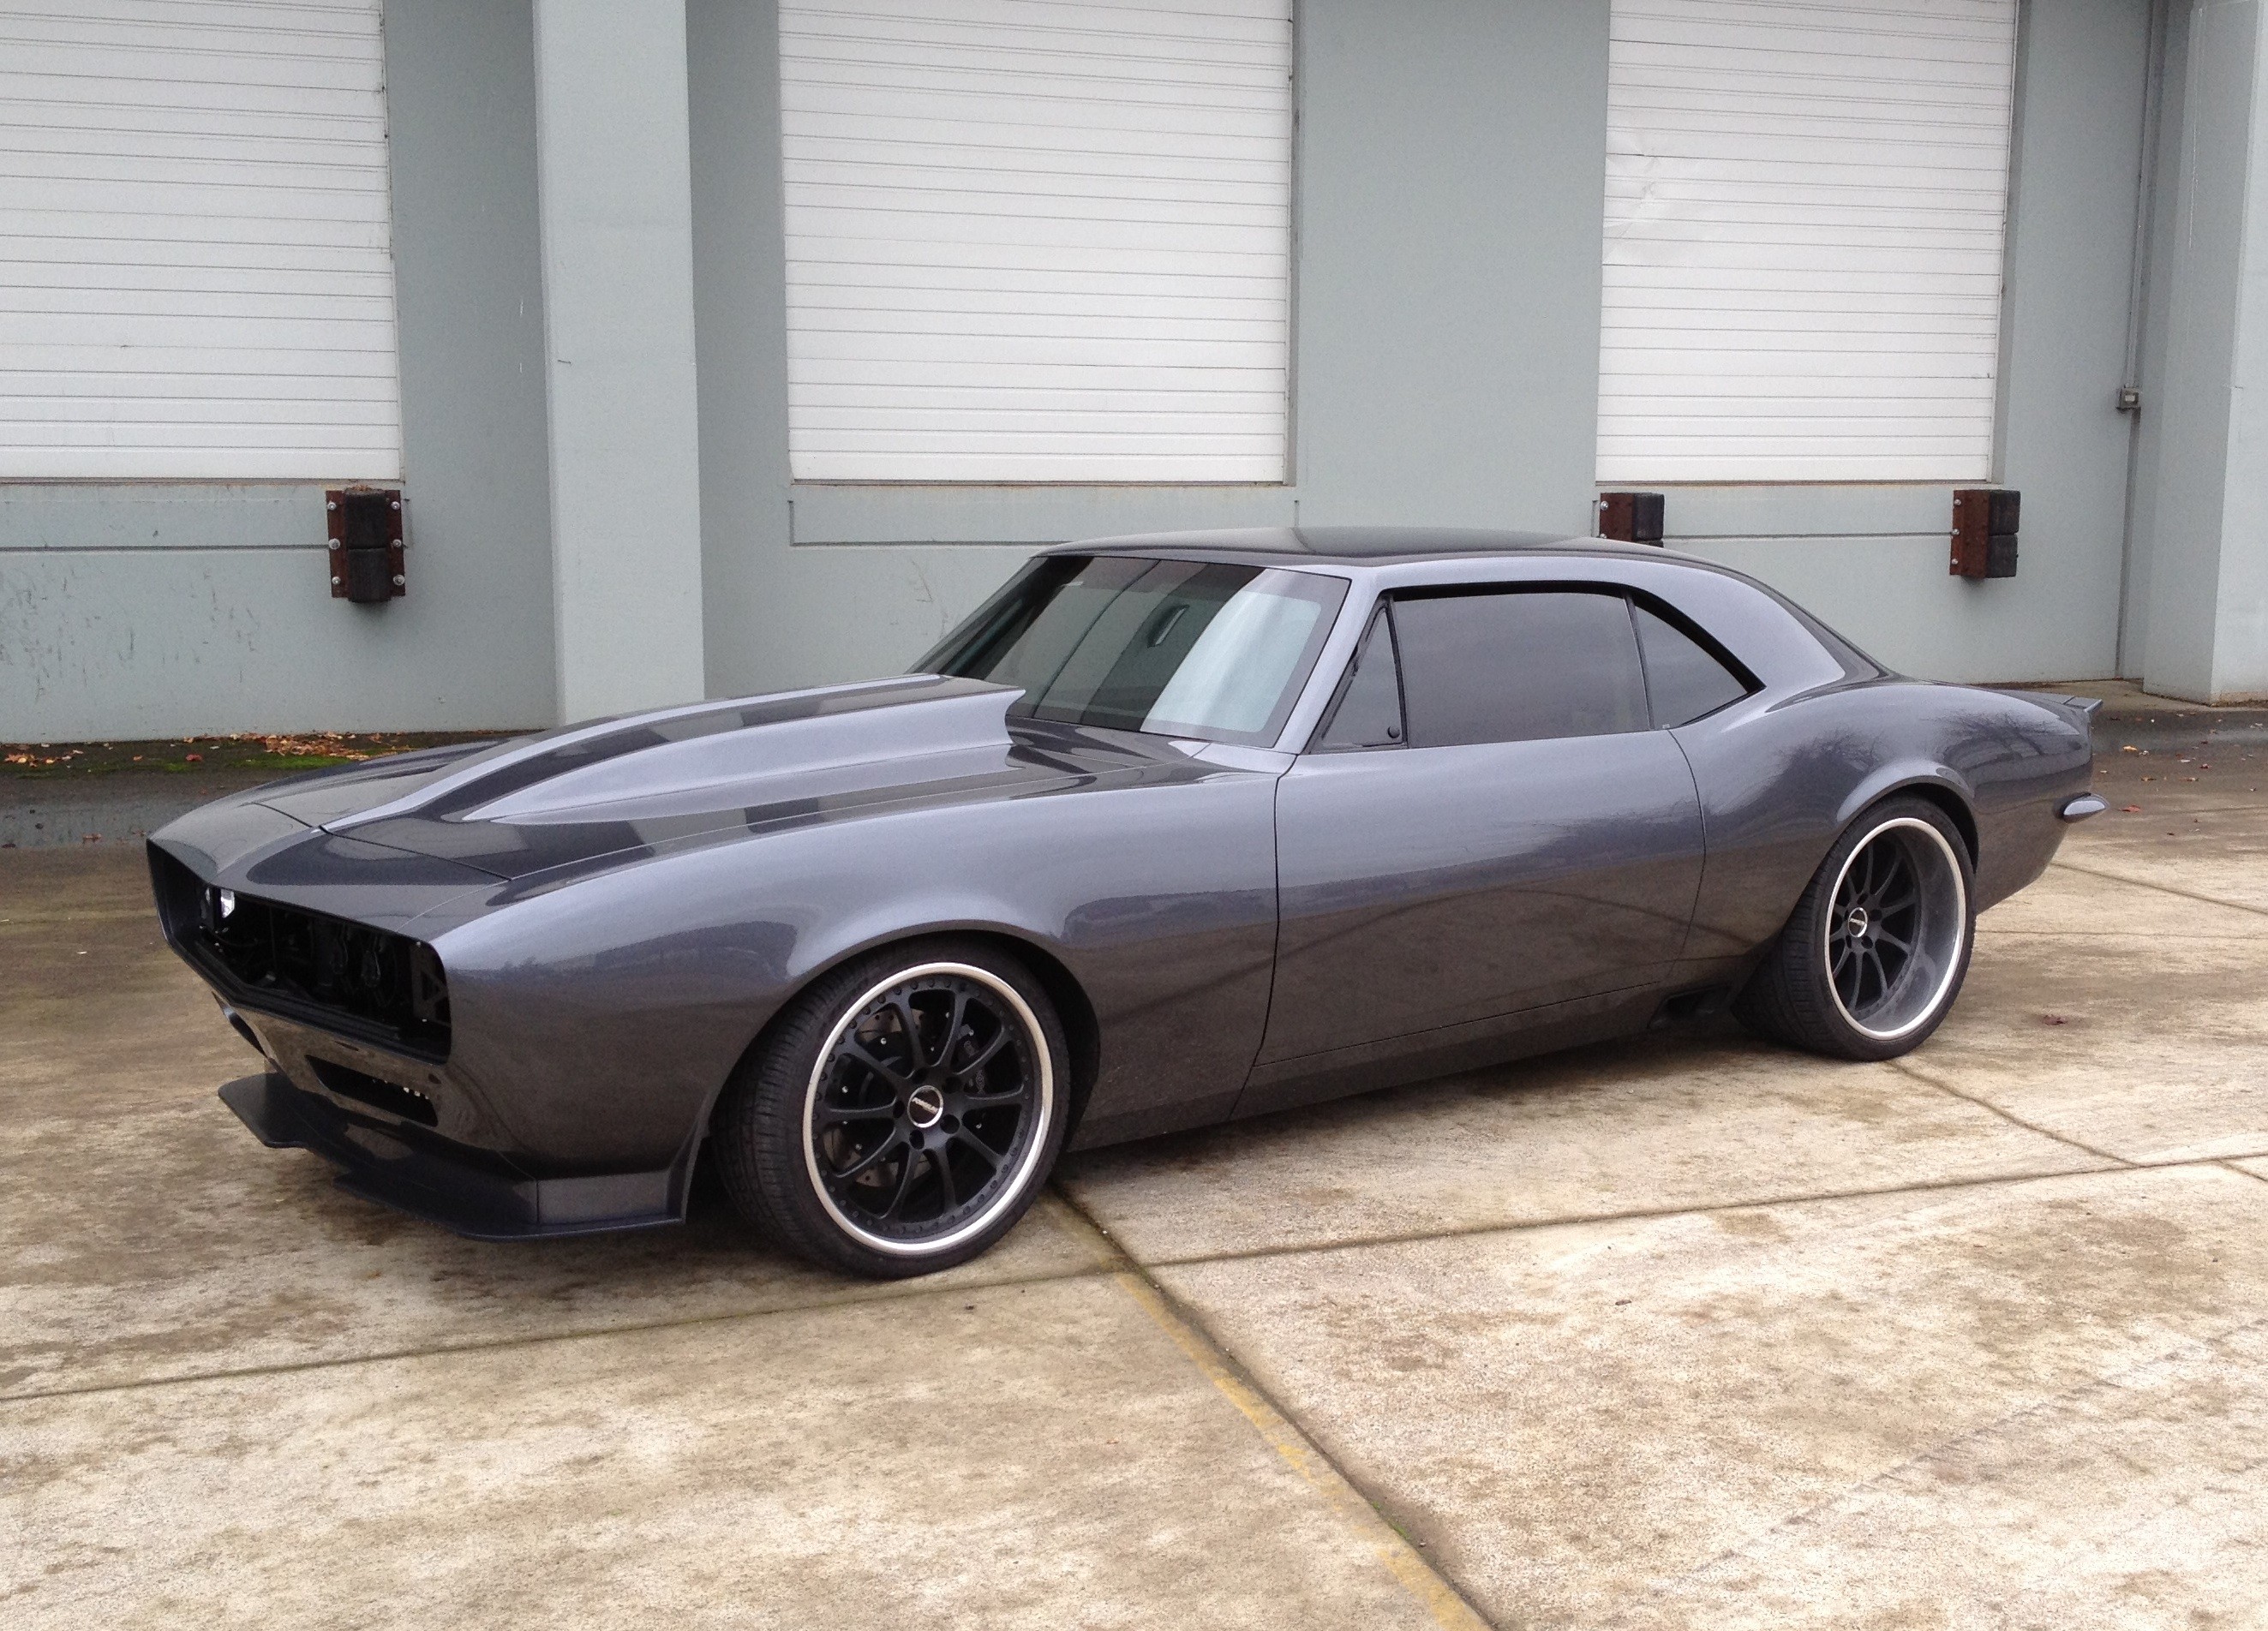 General 2647x1904 car muscle cars Chevrolet Camaro vehicle Chevrolet gray cars American cars